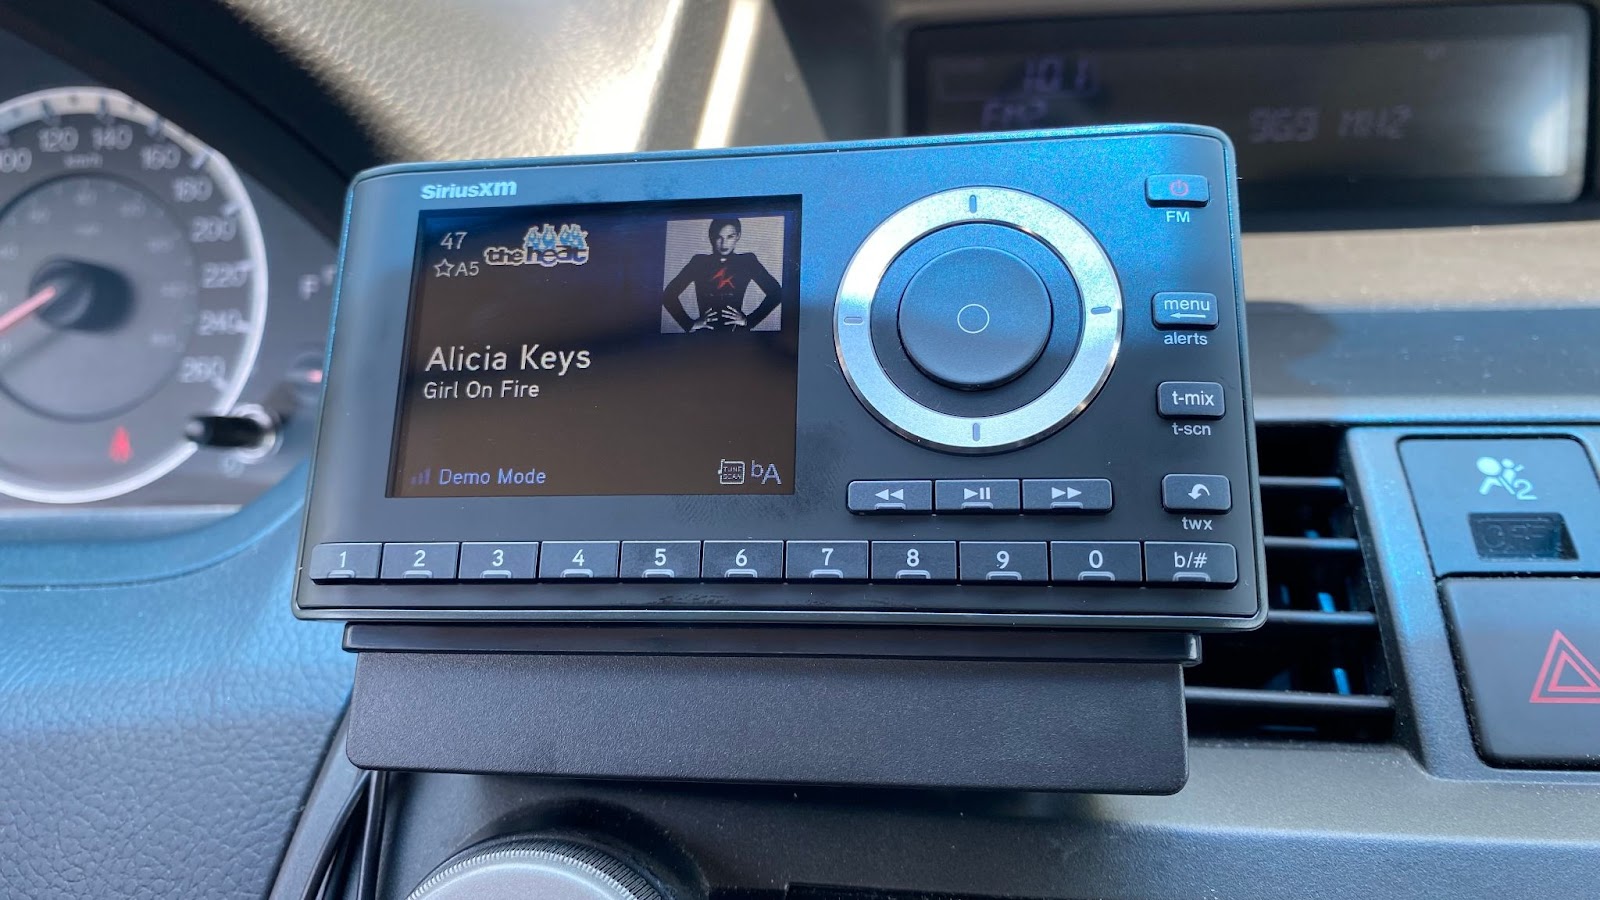 SiriusXM Onyx Plus satellite radio demo mode showing the title, band, and album art of a song.